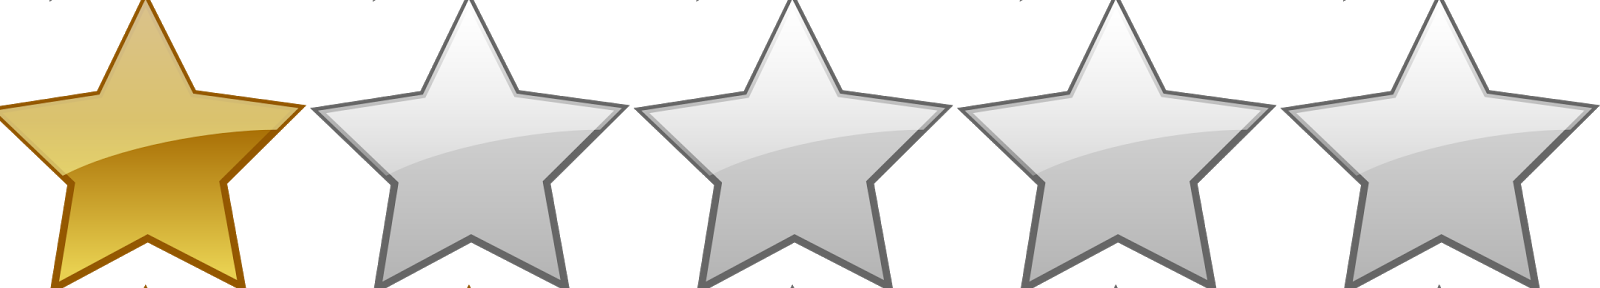 Rating - - 2 Out Of 5 Gold Stars (1600x288)